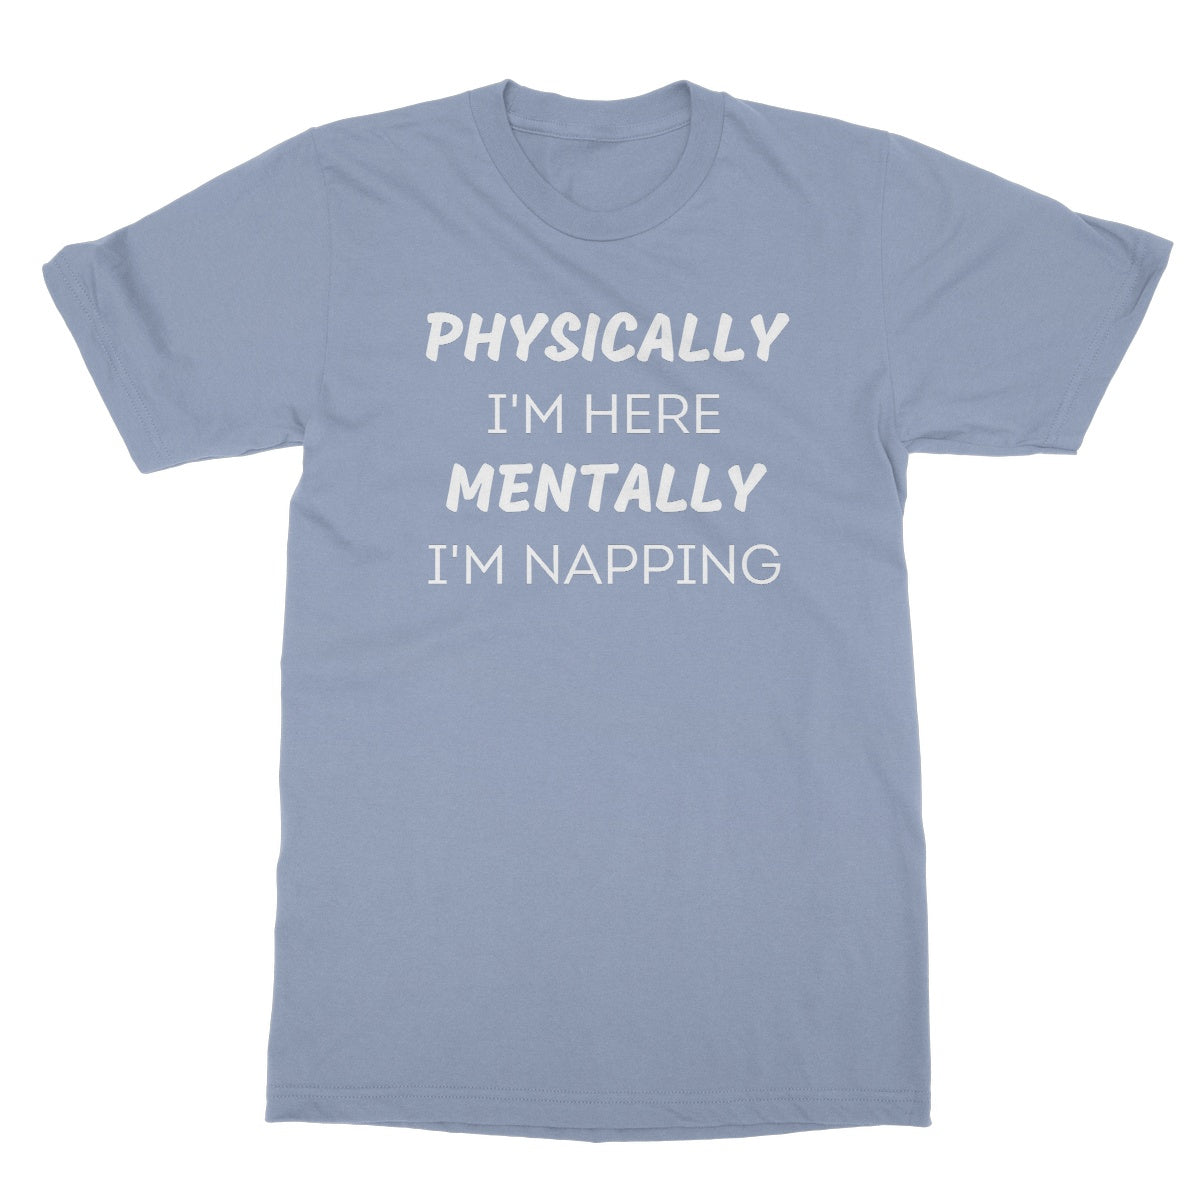 physically here mentally napping t shirt blue